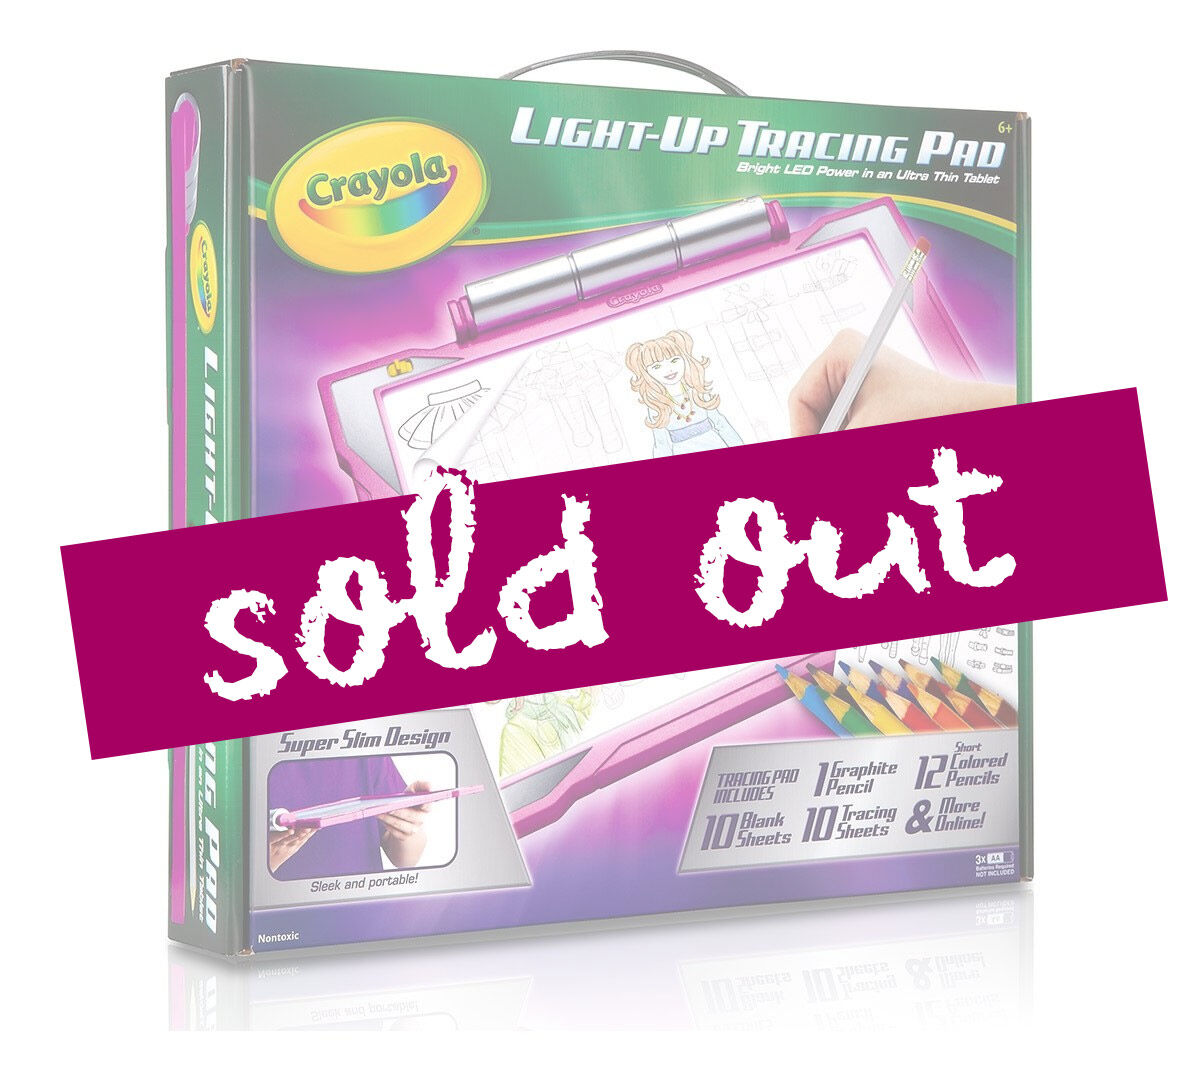 Crayola; Light-up Tracing Pad; Pink; Art Tool; Bright LEDs; Easy